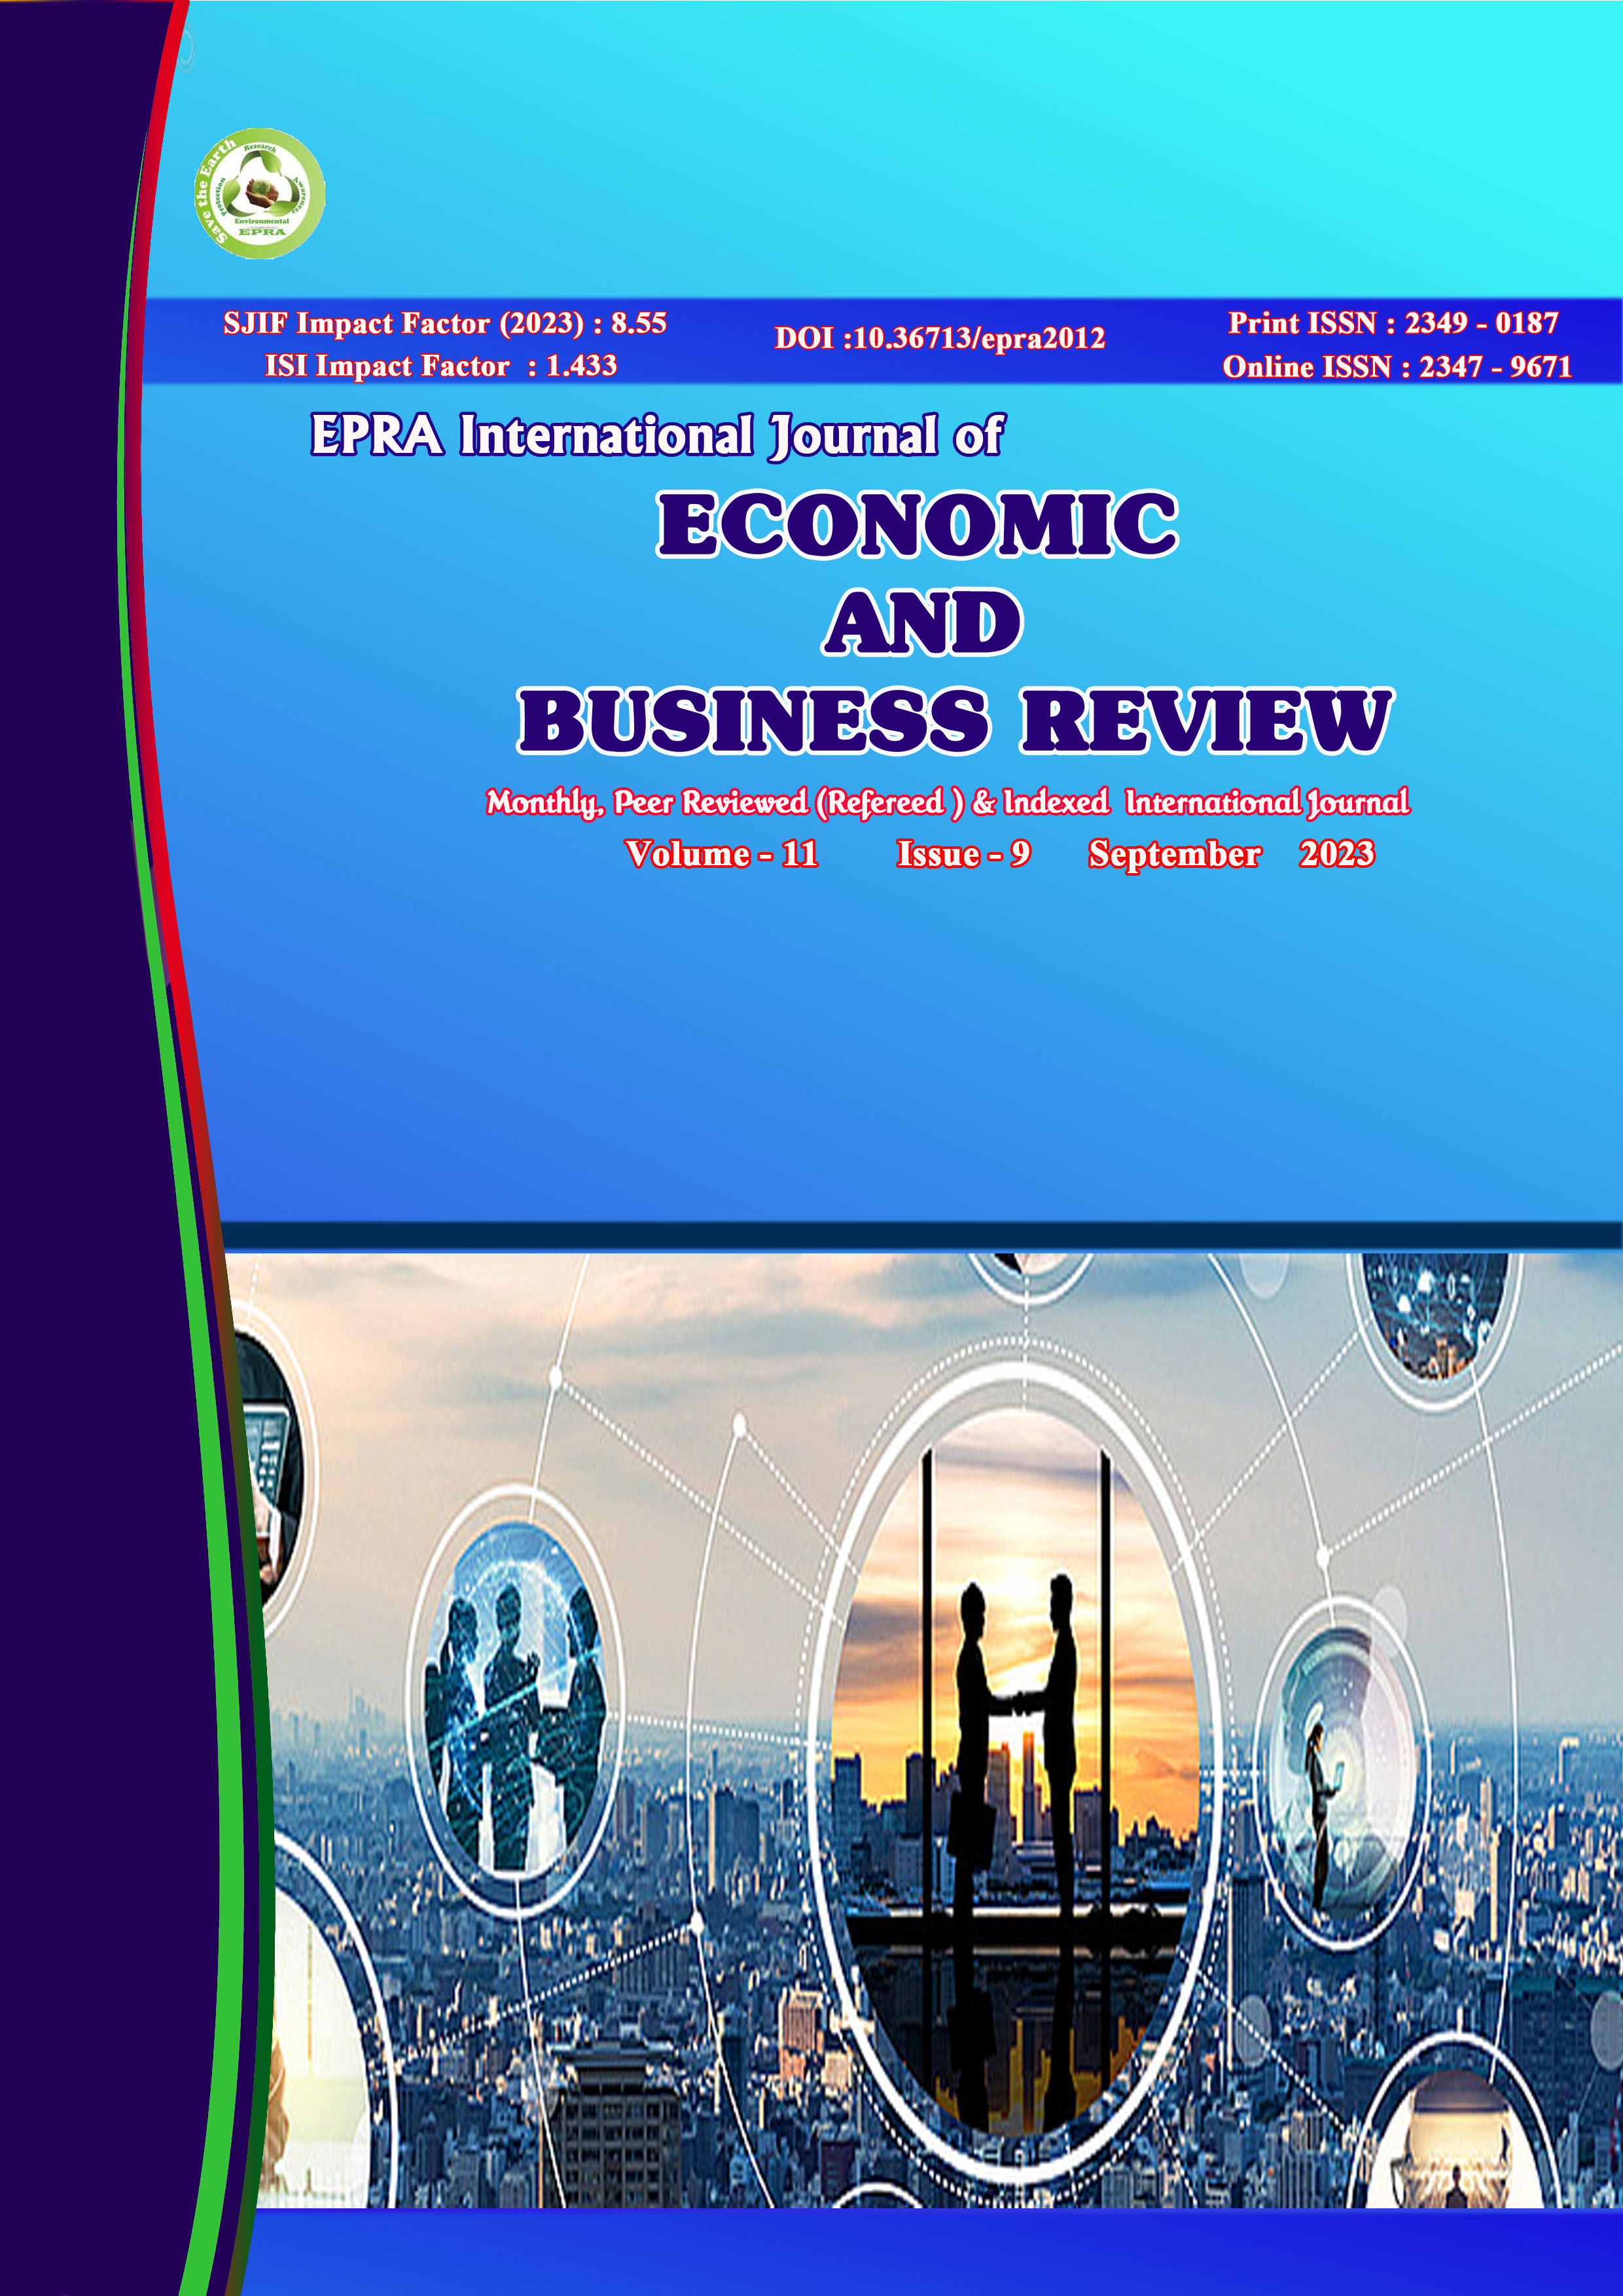 					View Vol. 11 No. 9 (2023): EPRA International Journal of Economic and Business Review(JEBR)
				